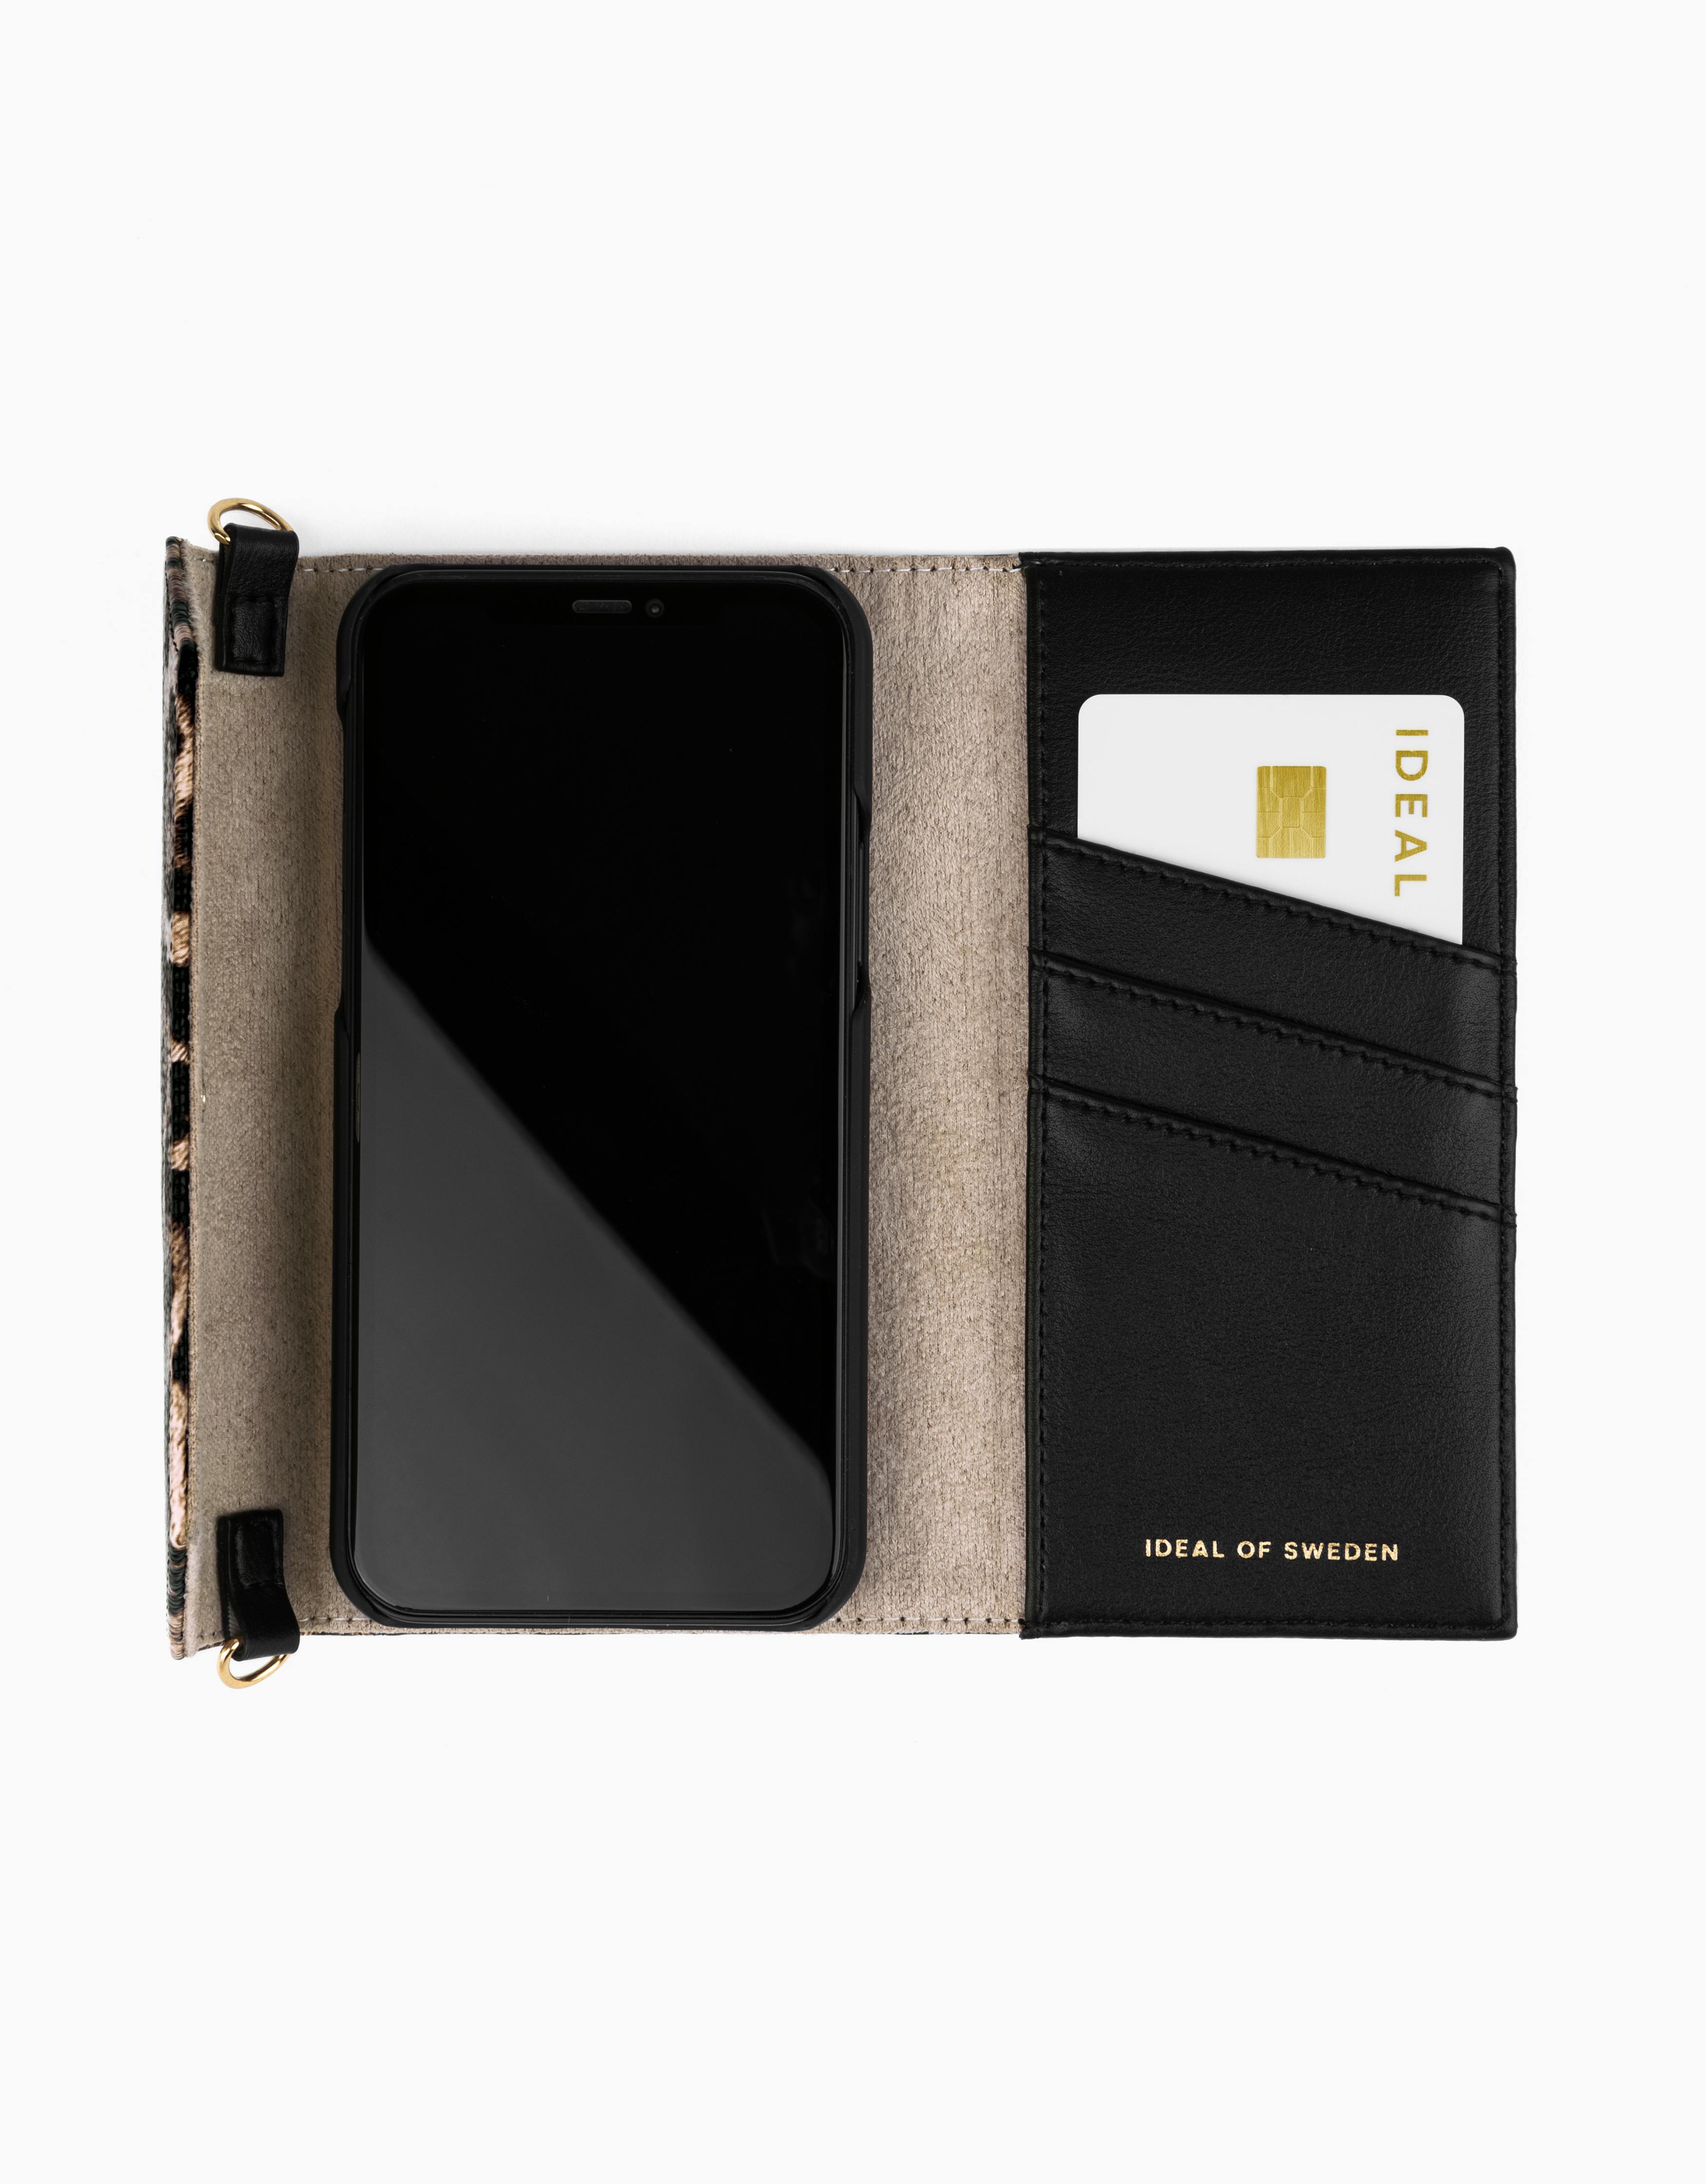 IDEAL OF SWEDEN Cassette Clutch Case for iPhone 11/XR - Midnight Leopard